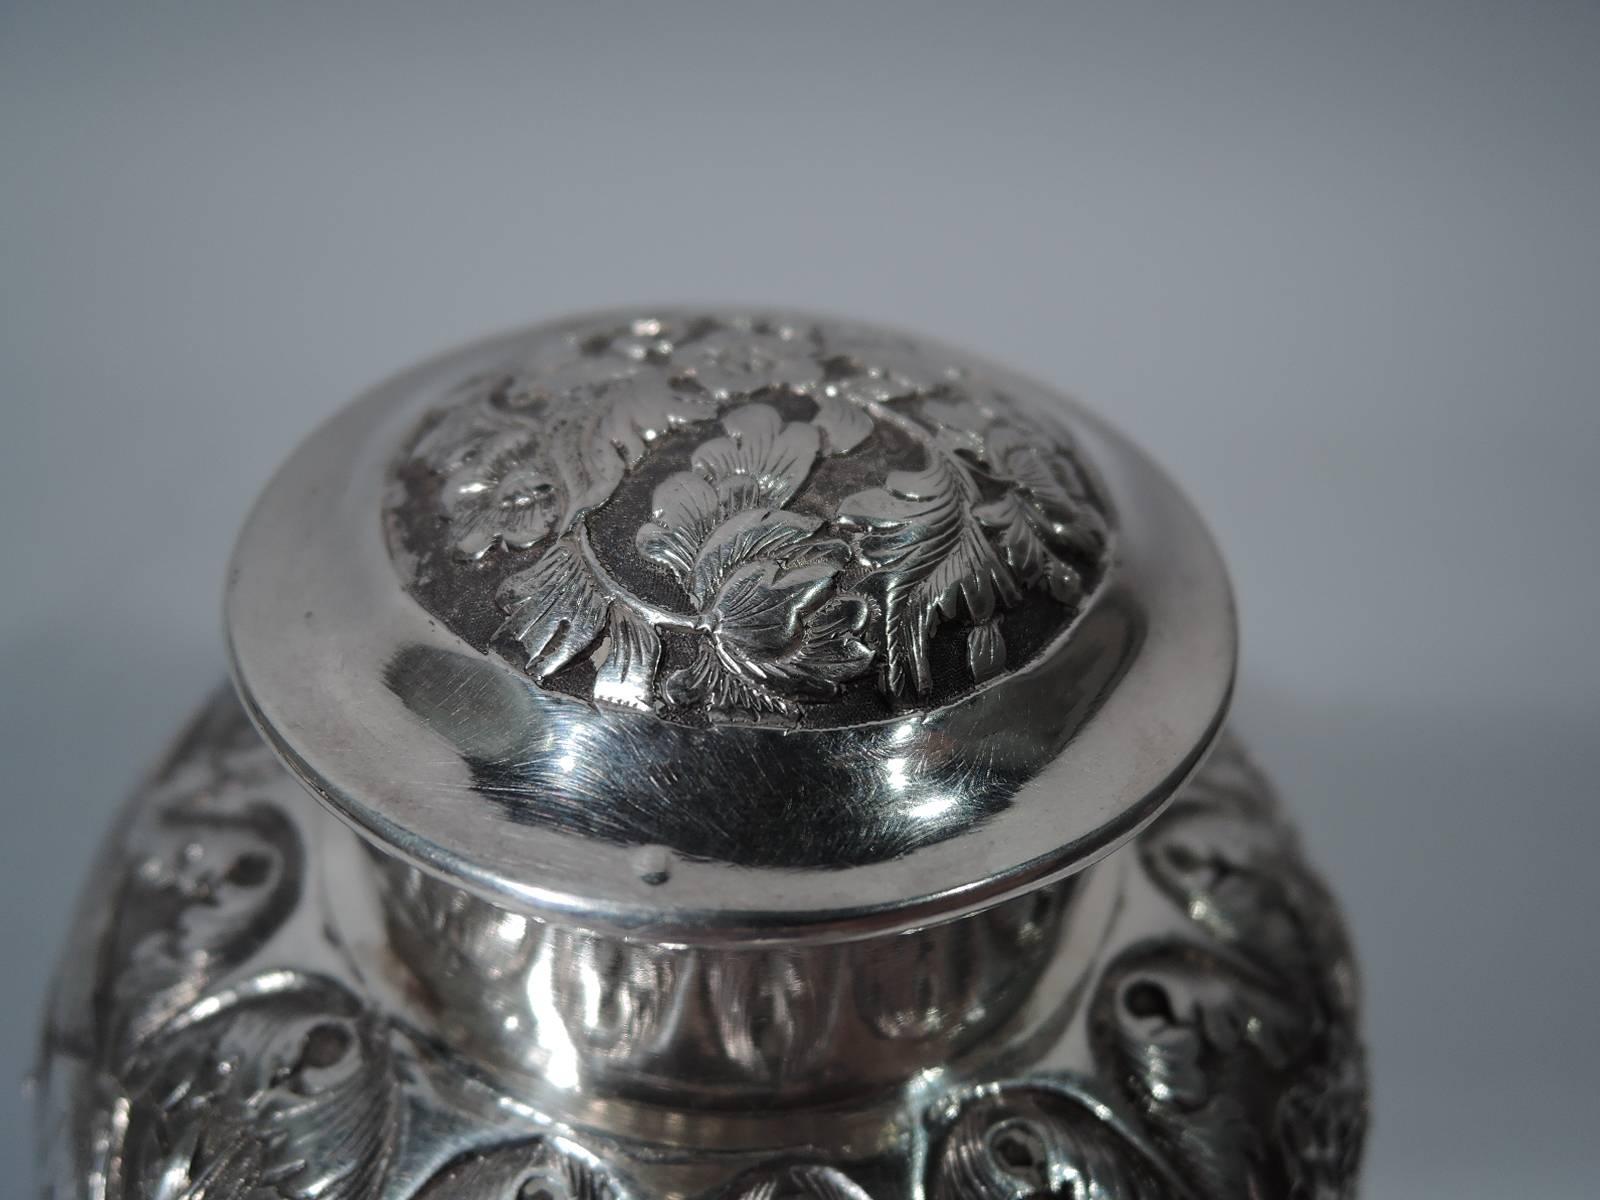 Antique Chinese Export Silver Tea Caddy by Hung Chong 1